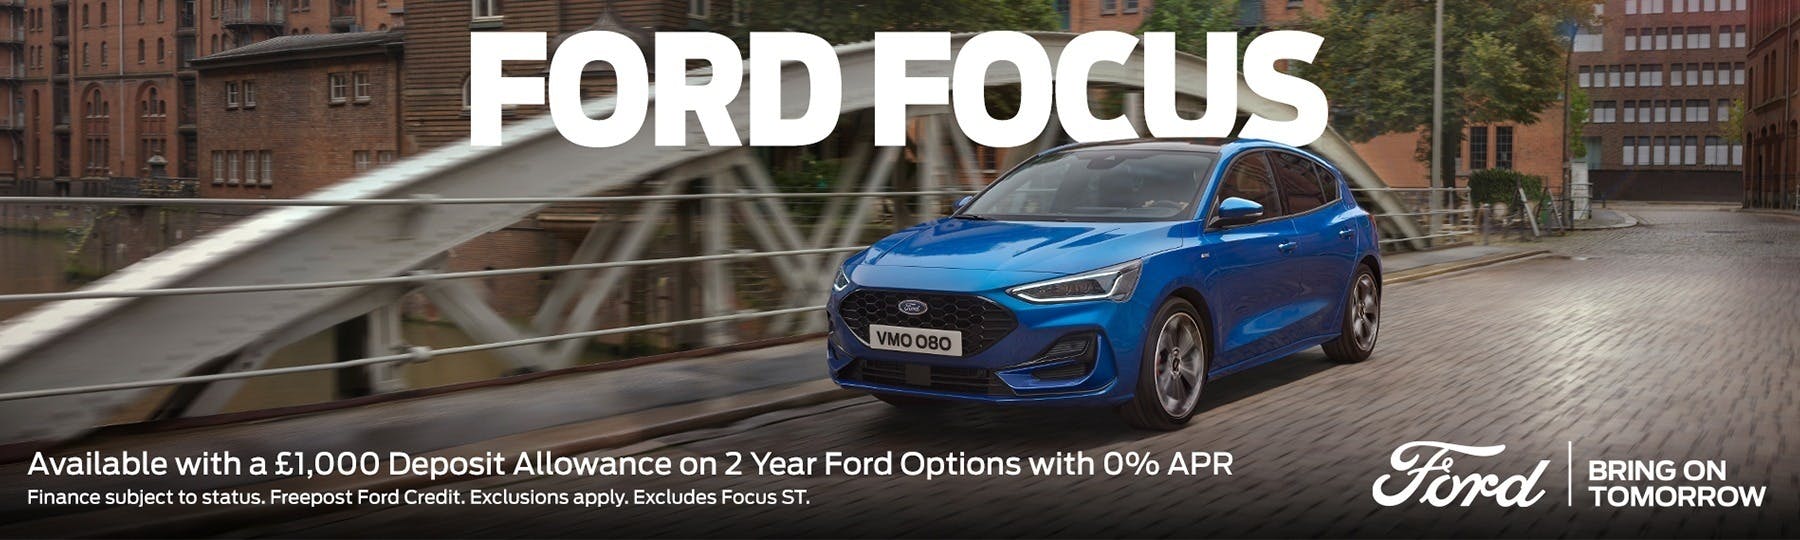 Ford Focus New Car Offer